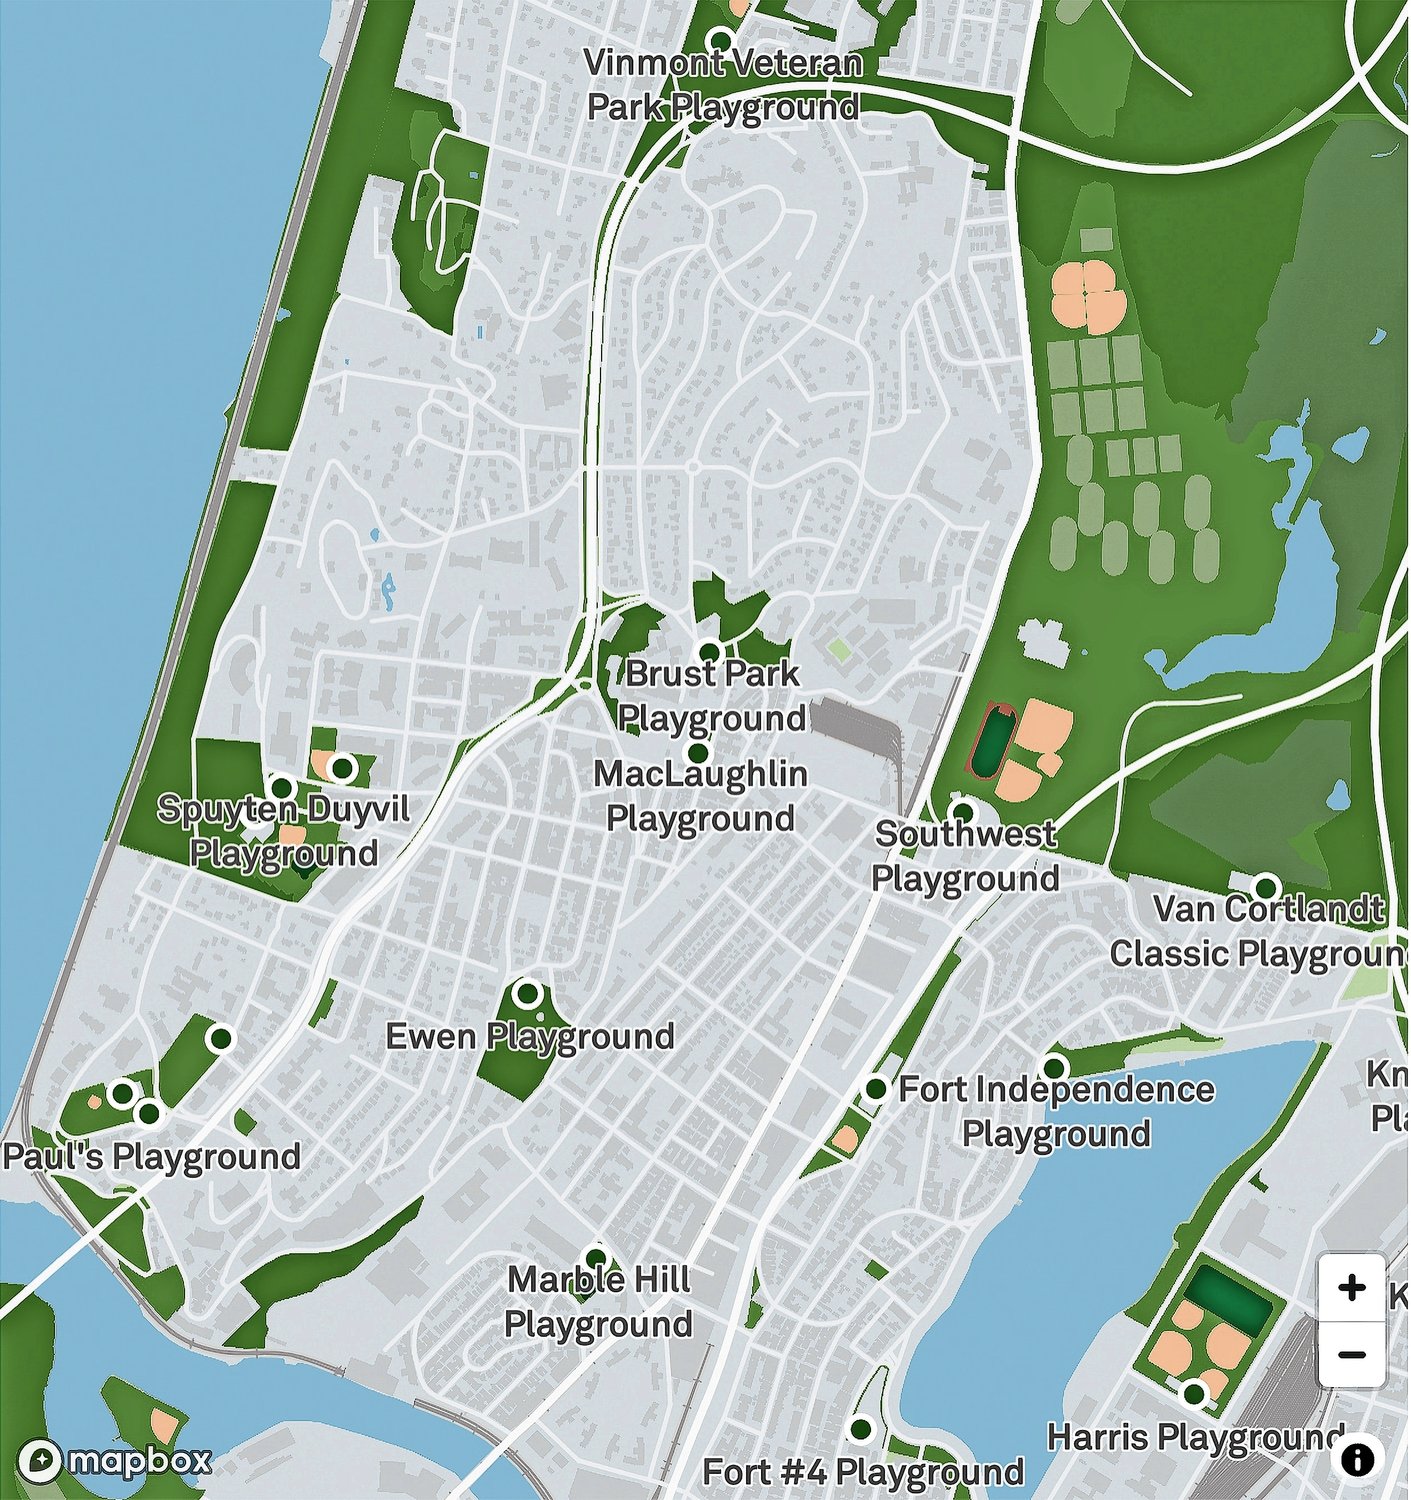 BetaNYC, a civic tech organization, created an interactive online map to make New Yorkers’ lives easier. Users can type in an address, or simply use the filter icons to make their choice of accessible ramps, ADA-compliant comfort stations or inclusive play elements.